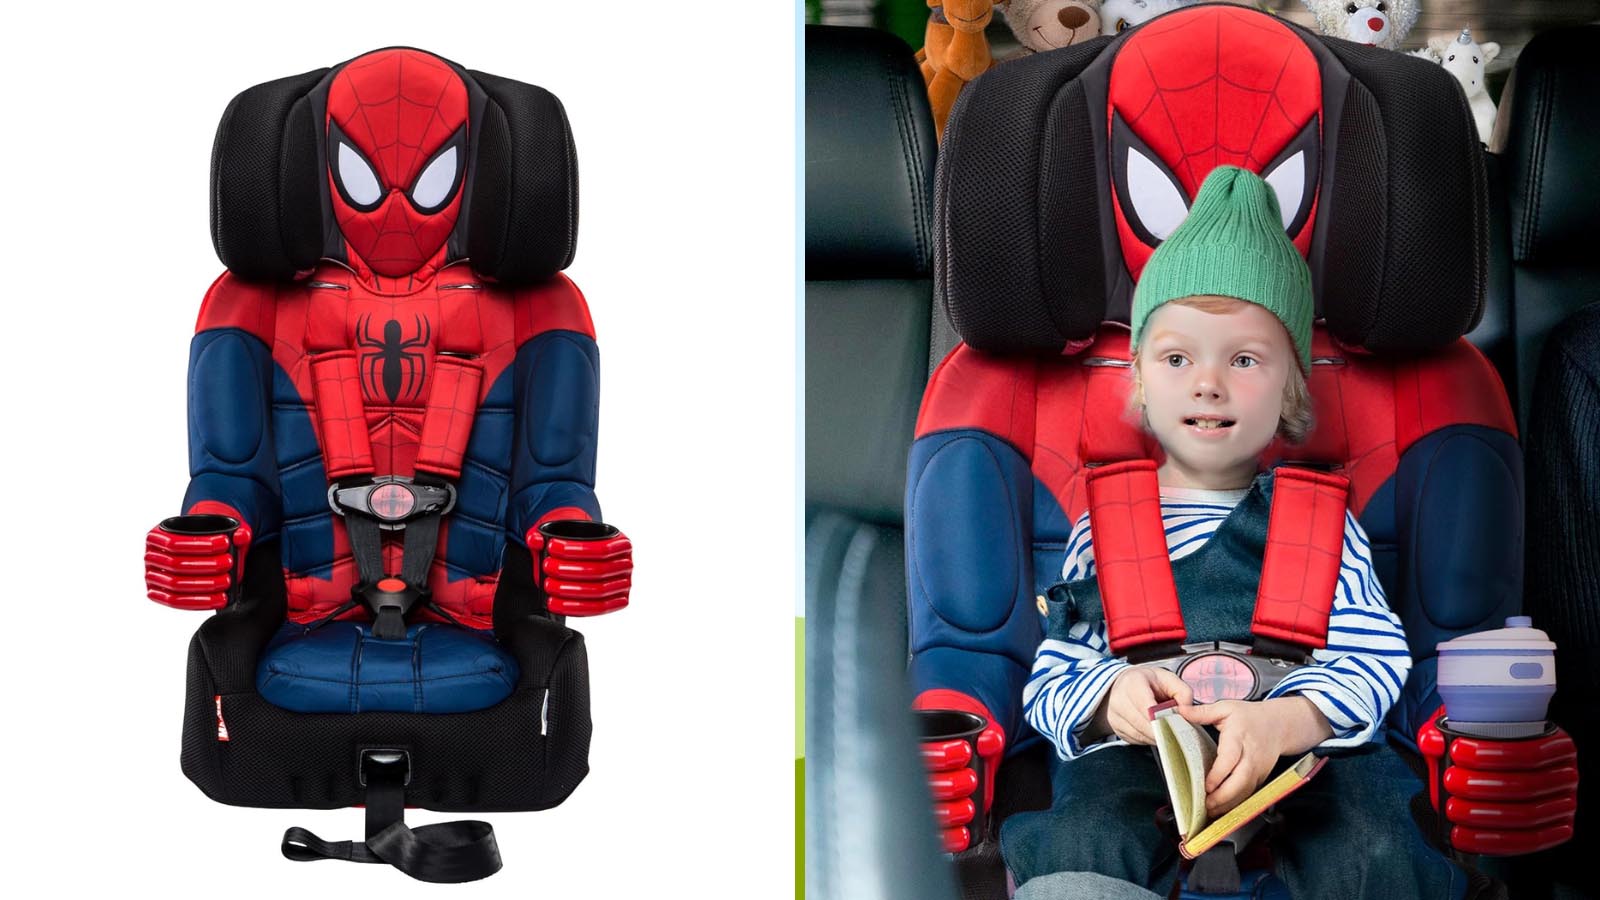 Harness Booster Seat Review A Parent’s Perspective